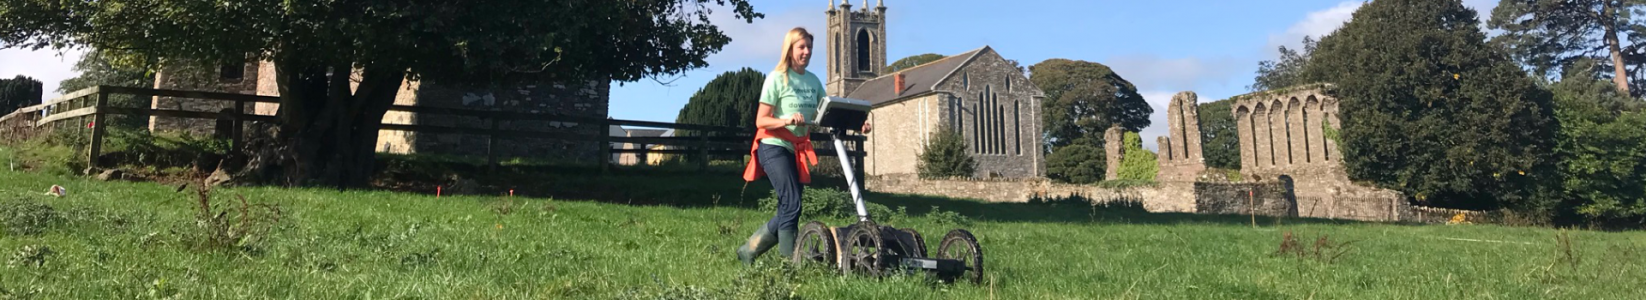 A women uses geophysics equipment to survey an area close to a church.